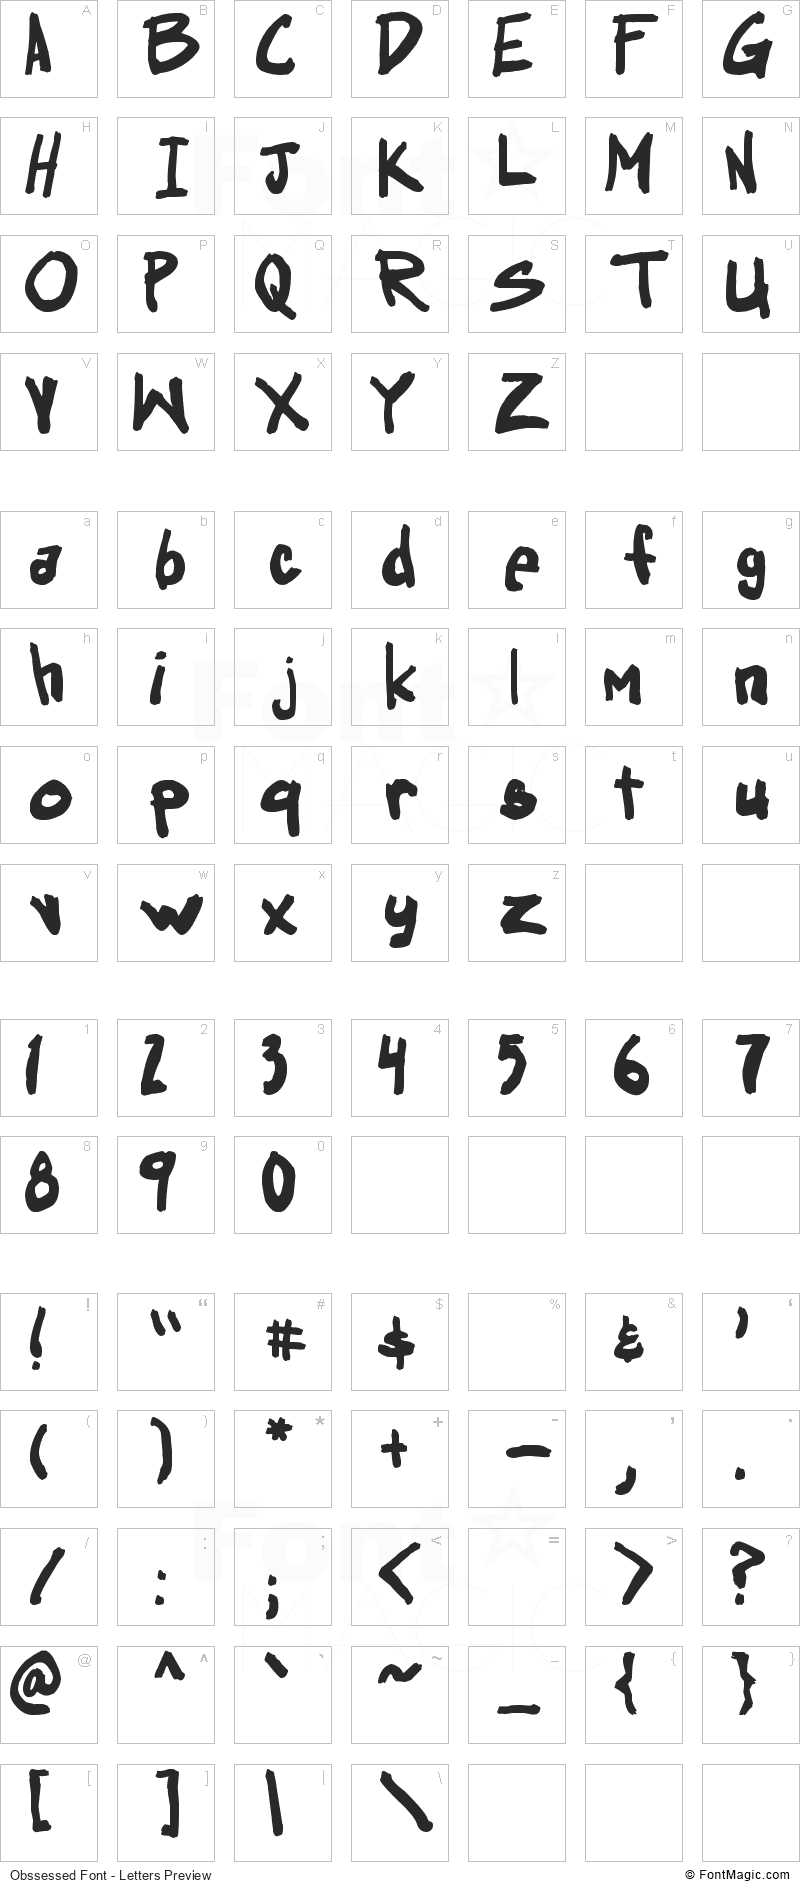 Obssessed Font - All Latters Preview Chart